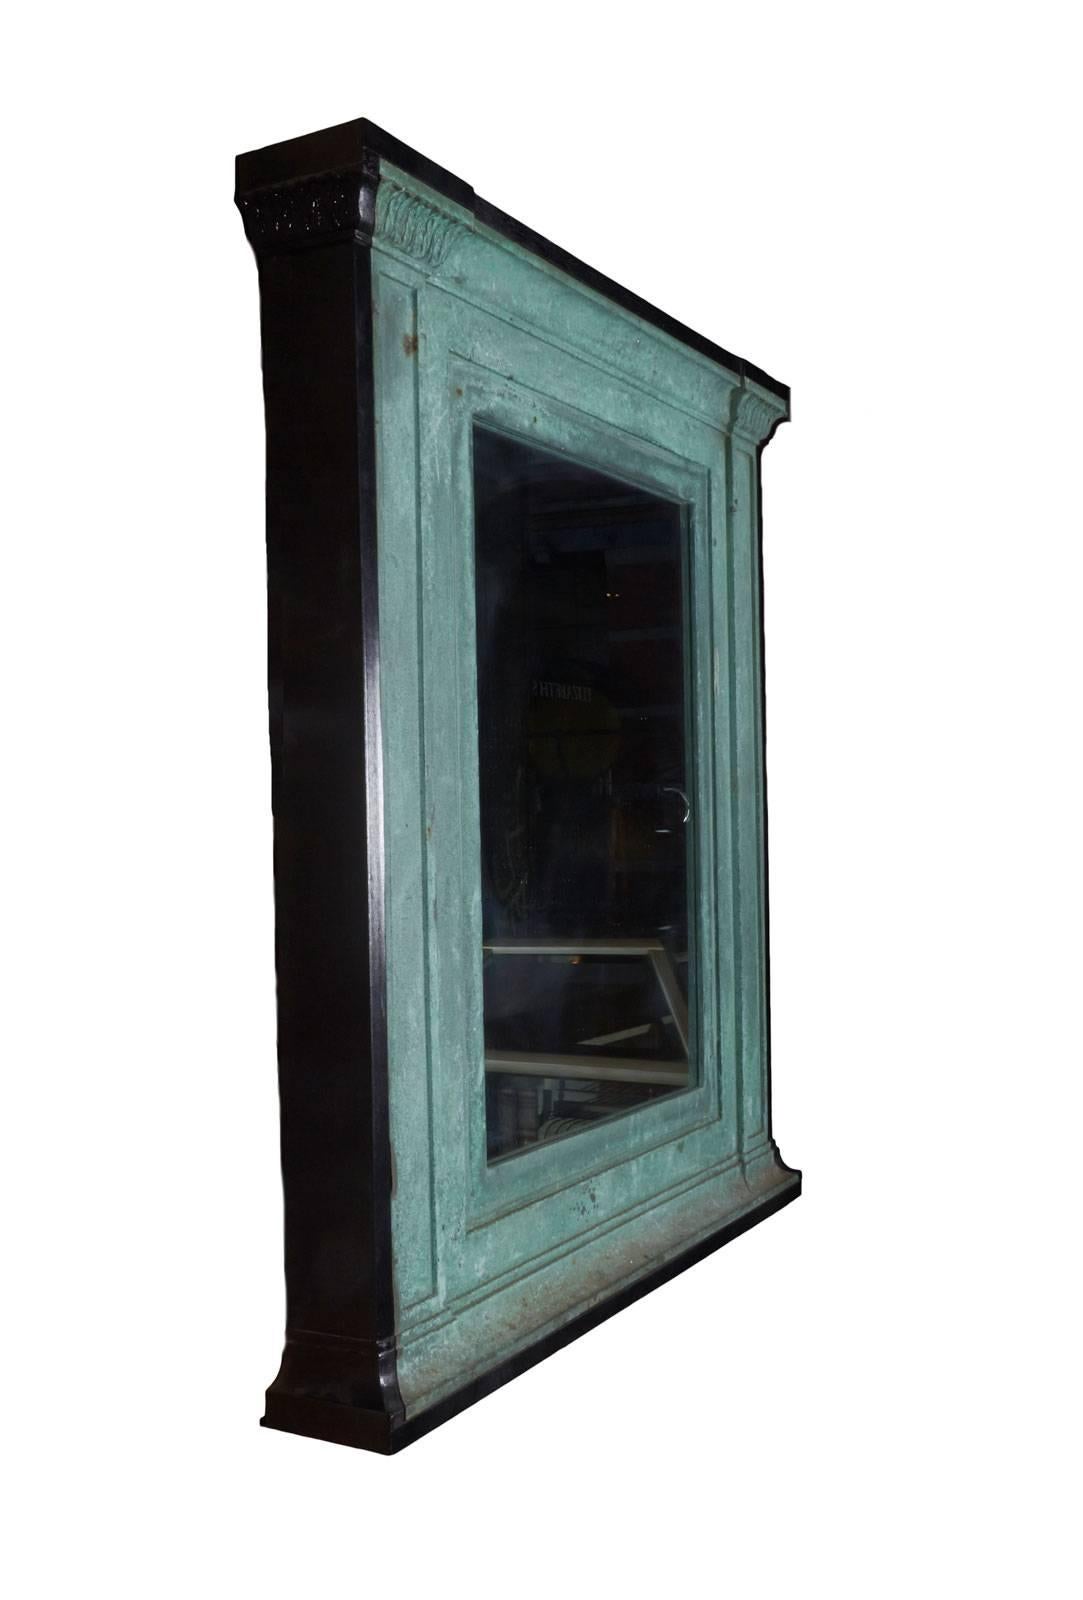 Bronze mirror in original fabulous green patina with ebonized black surround. Converted from exterior building directories.
Pair available.